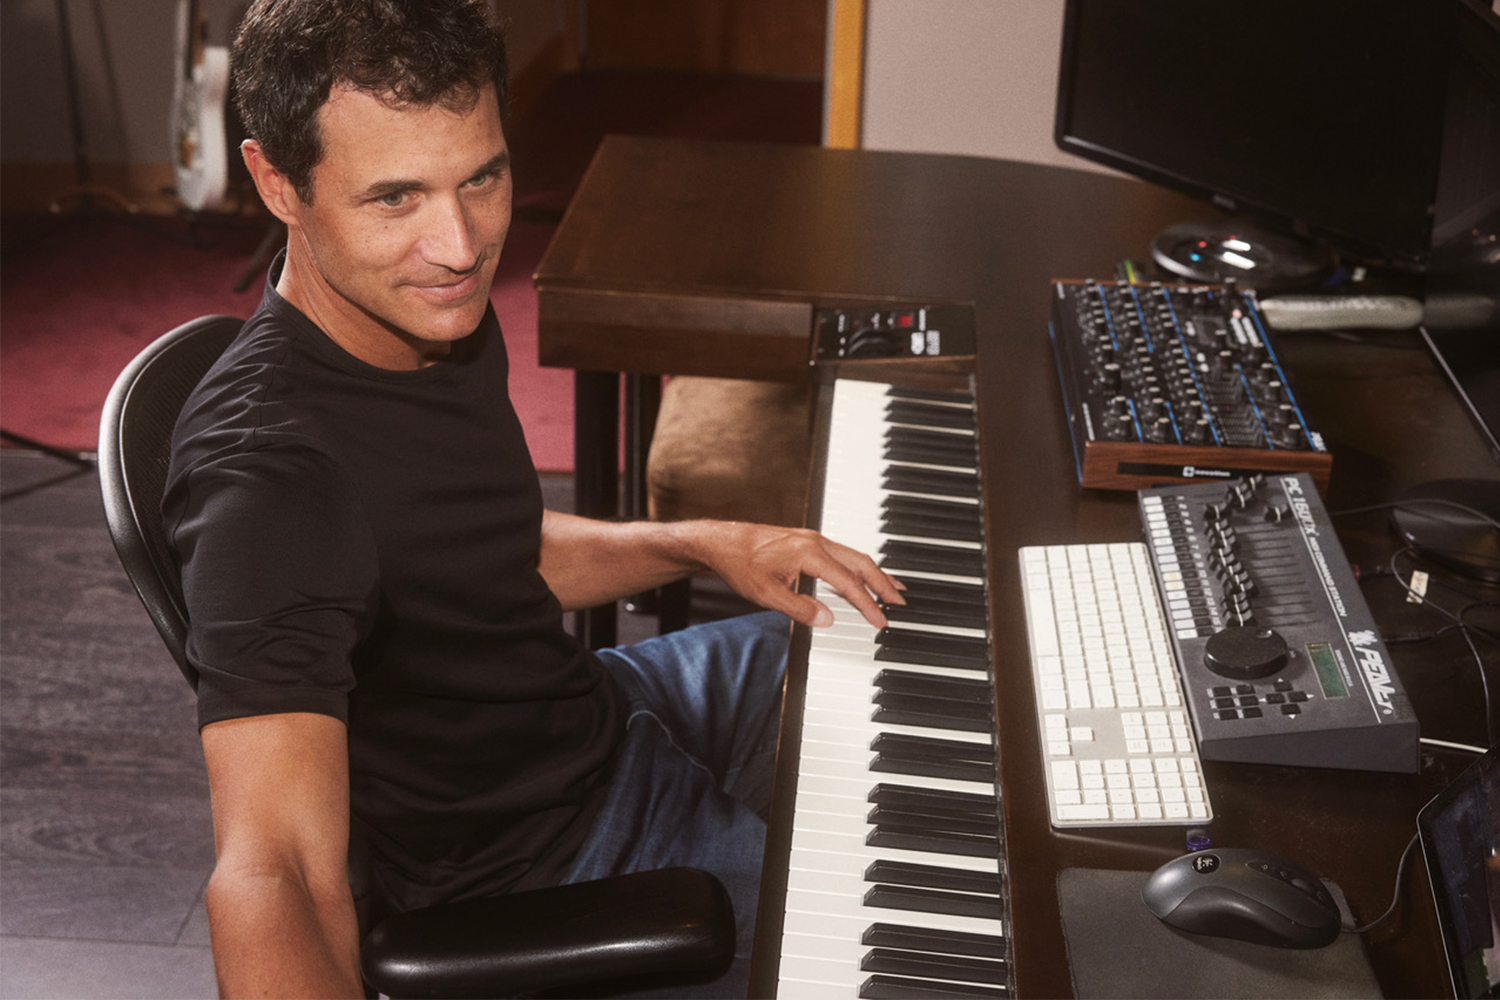 Ramin Djawadi, composer for "House of the Dragon" and "Game of Thrones," sits at a keyboard in his music studio